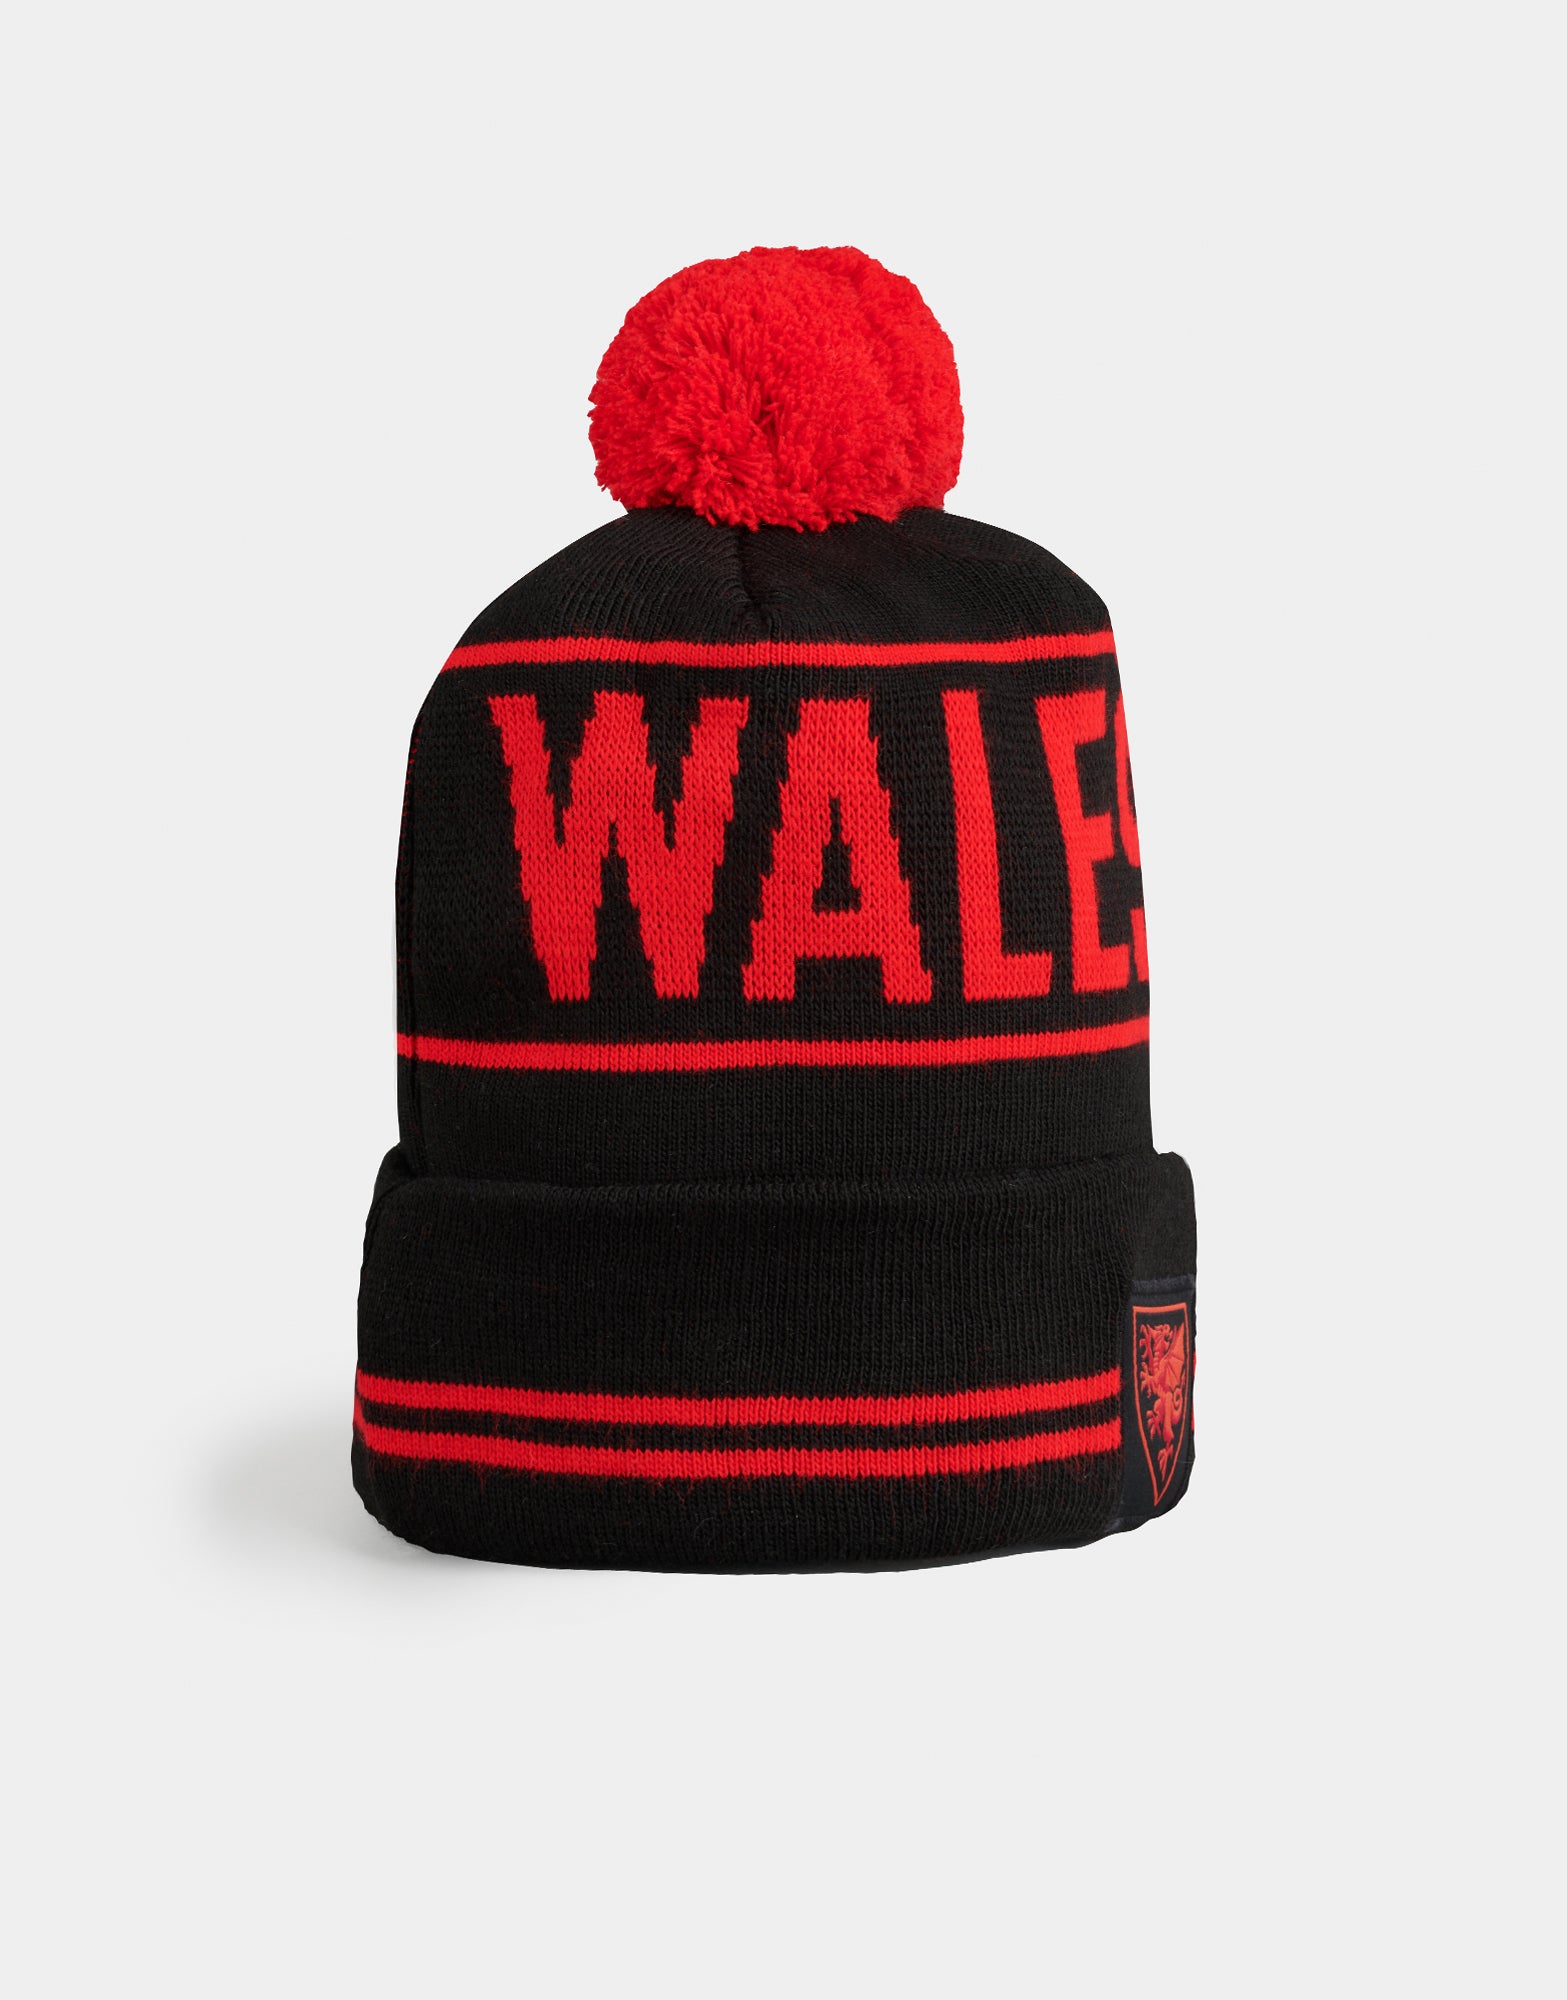 Official Team Wales Bobble Hat - The World Football Store